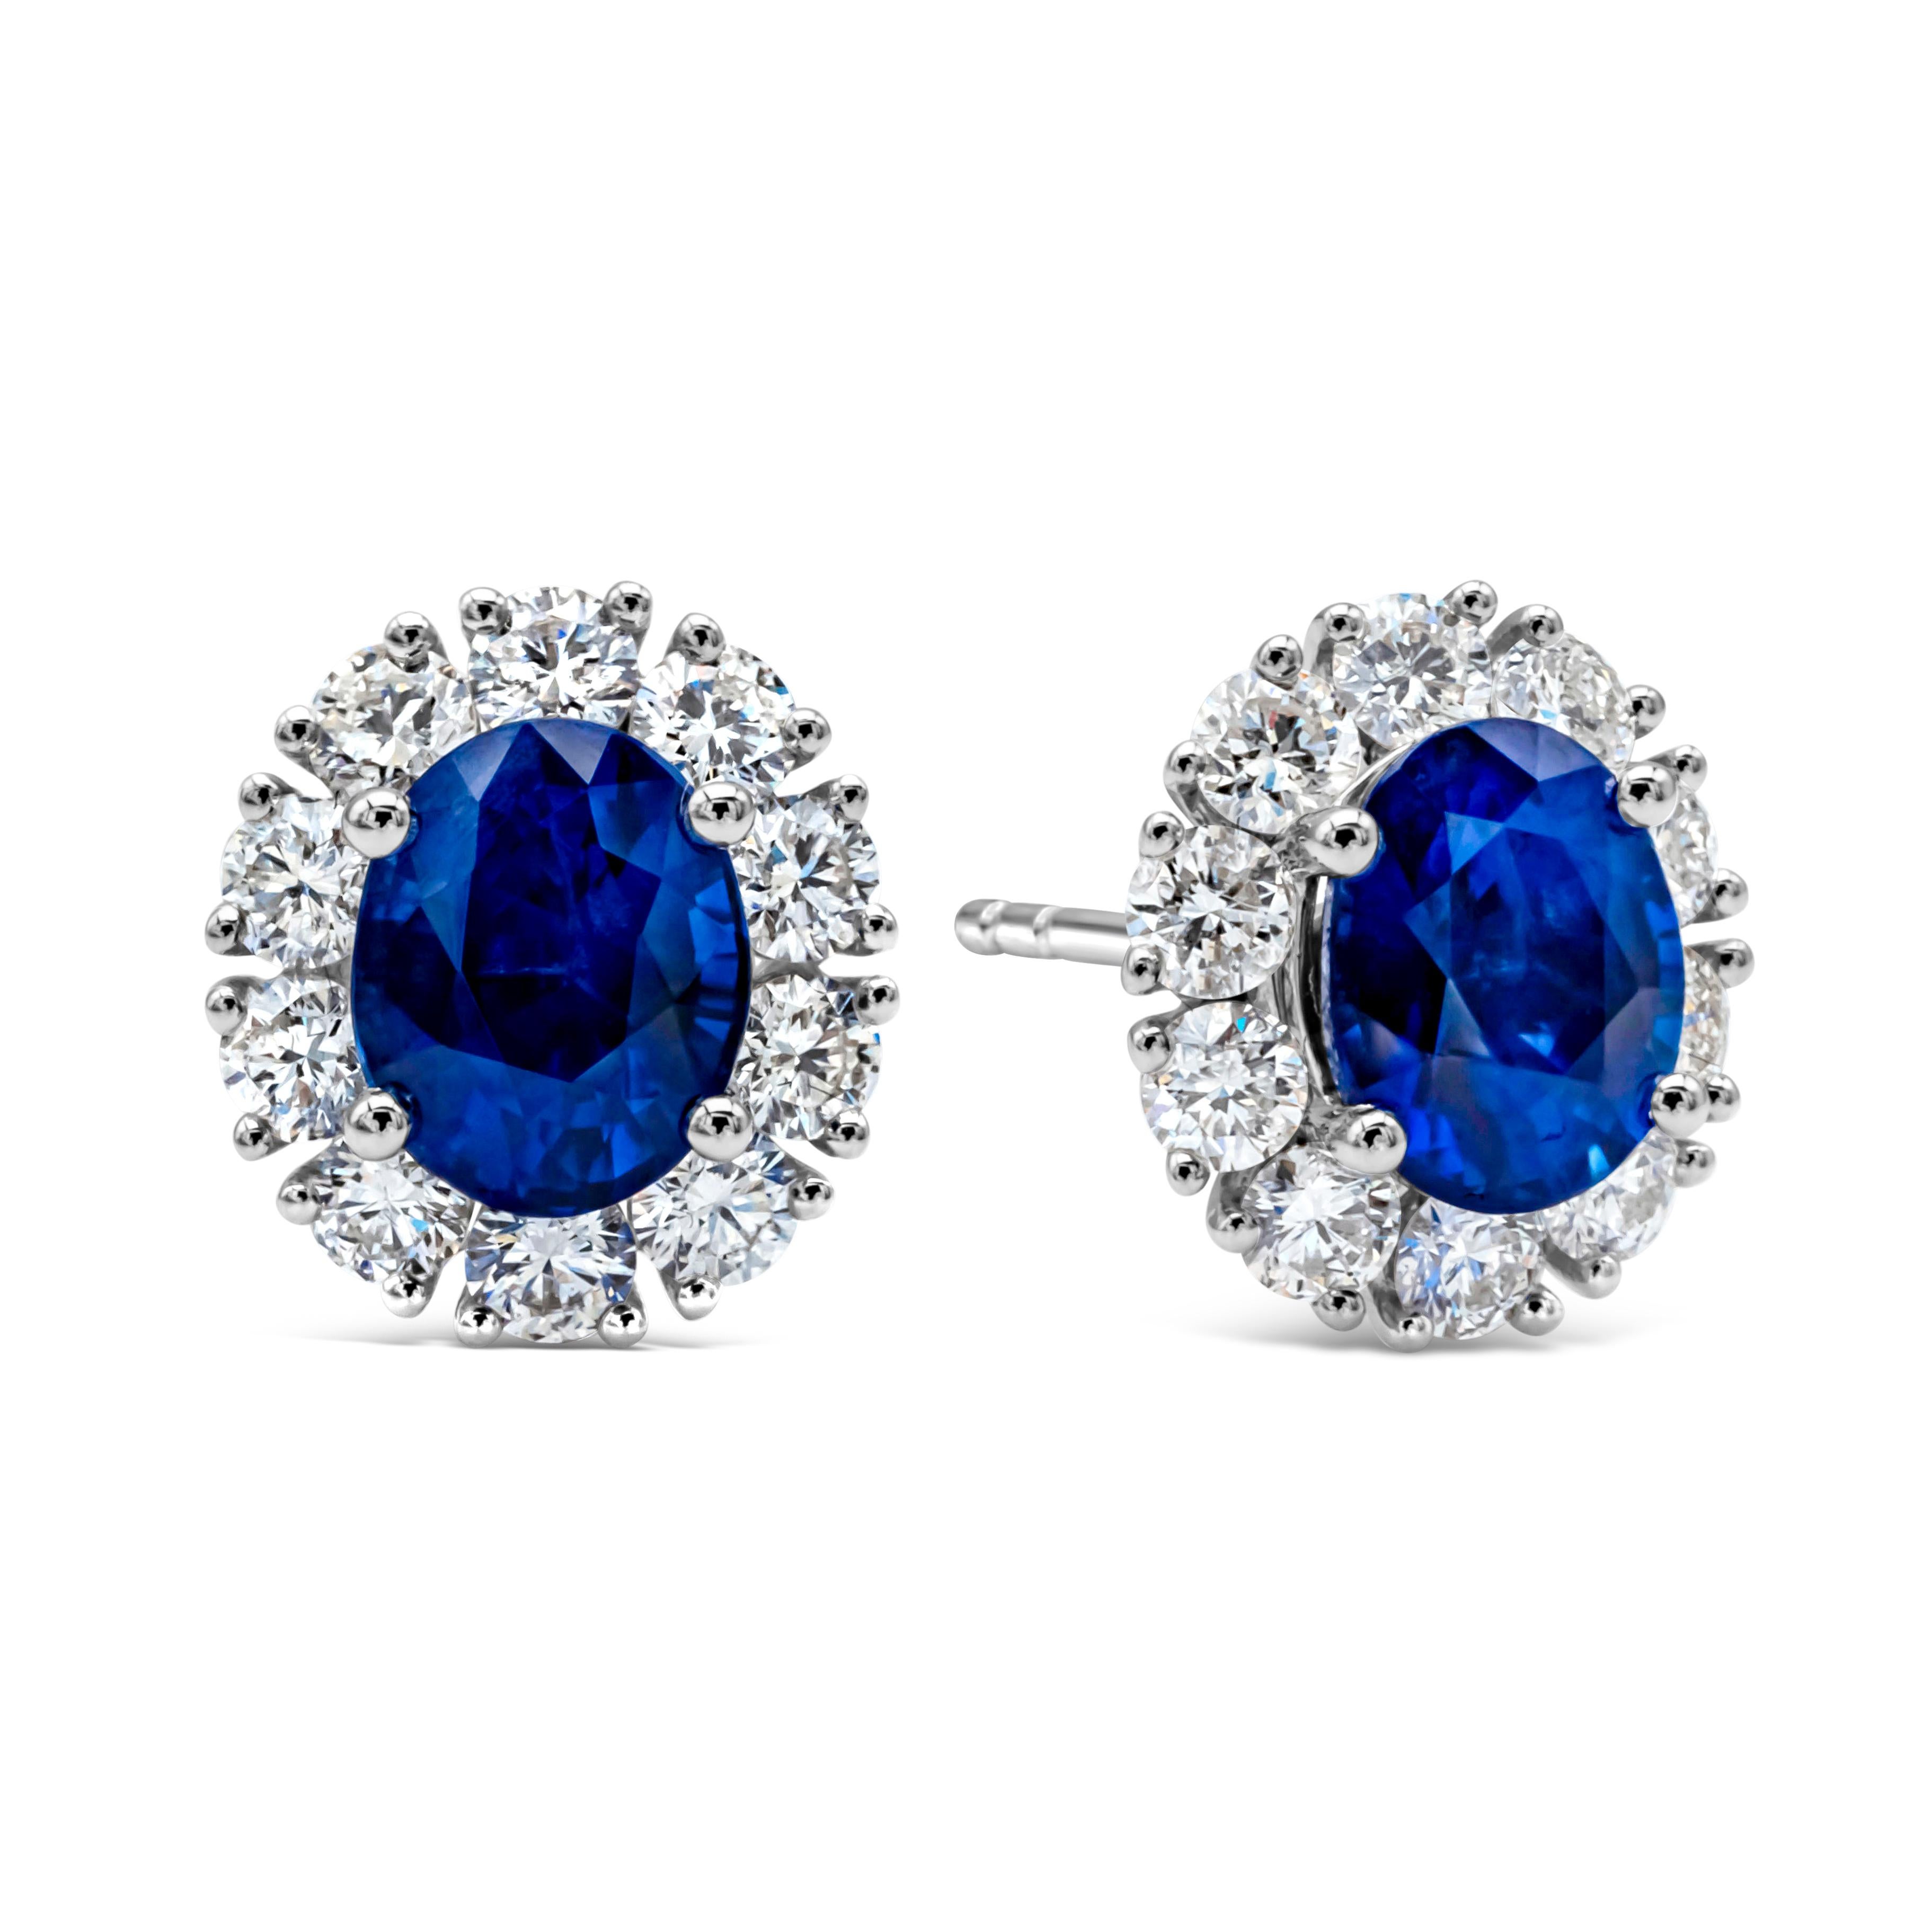 A simple and classic pair of stud earrings showcasing an oval cut blue sapphires weighing 2.29 carats total, set in a timeless four prong basket setting. Surrounded by a single row of round brilliant diamonds weighing 0.84 carats total, F color and